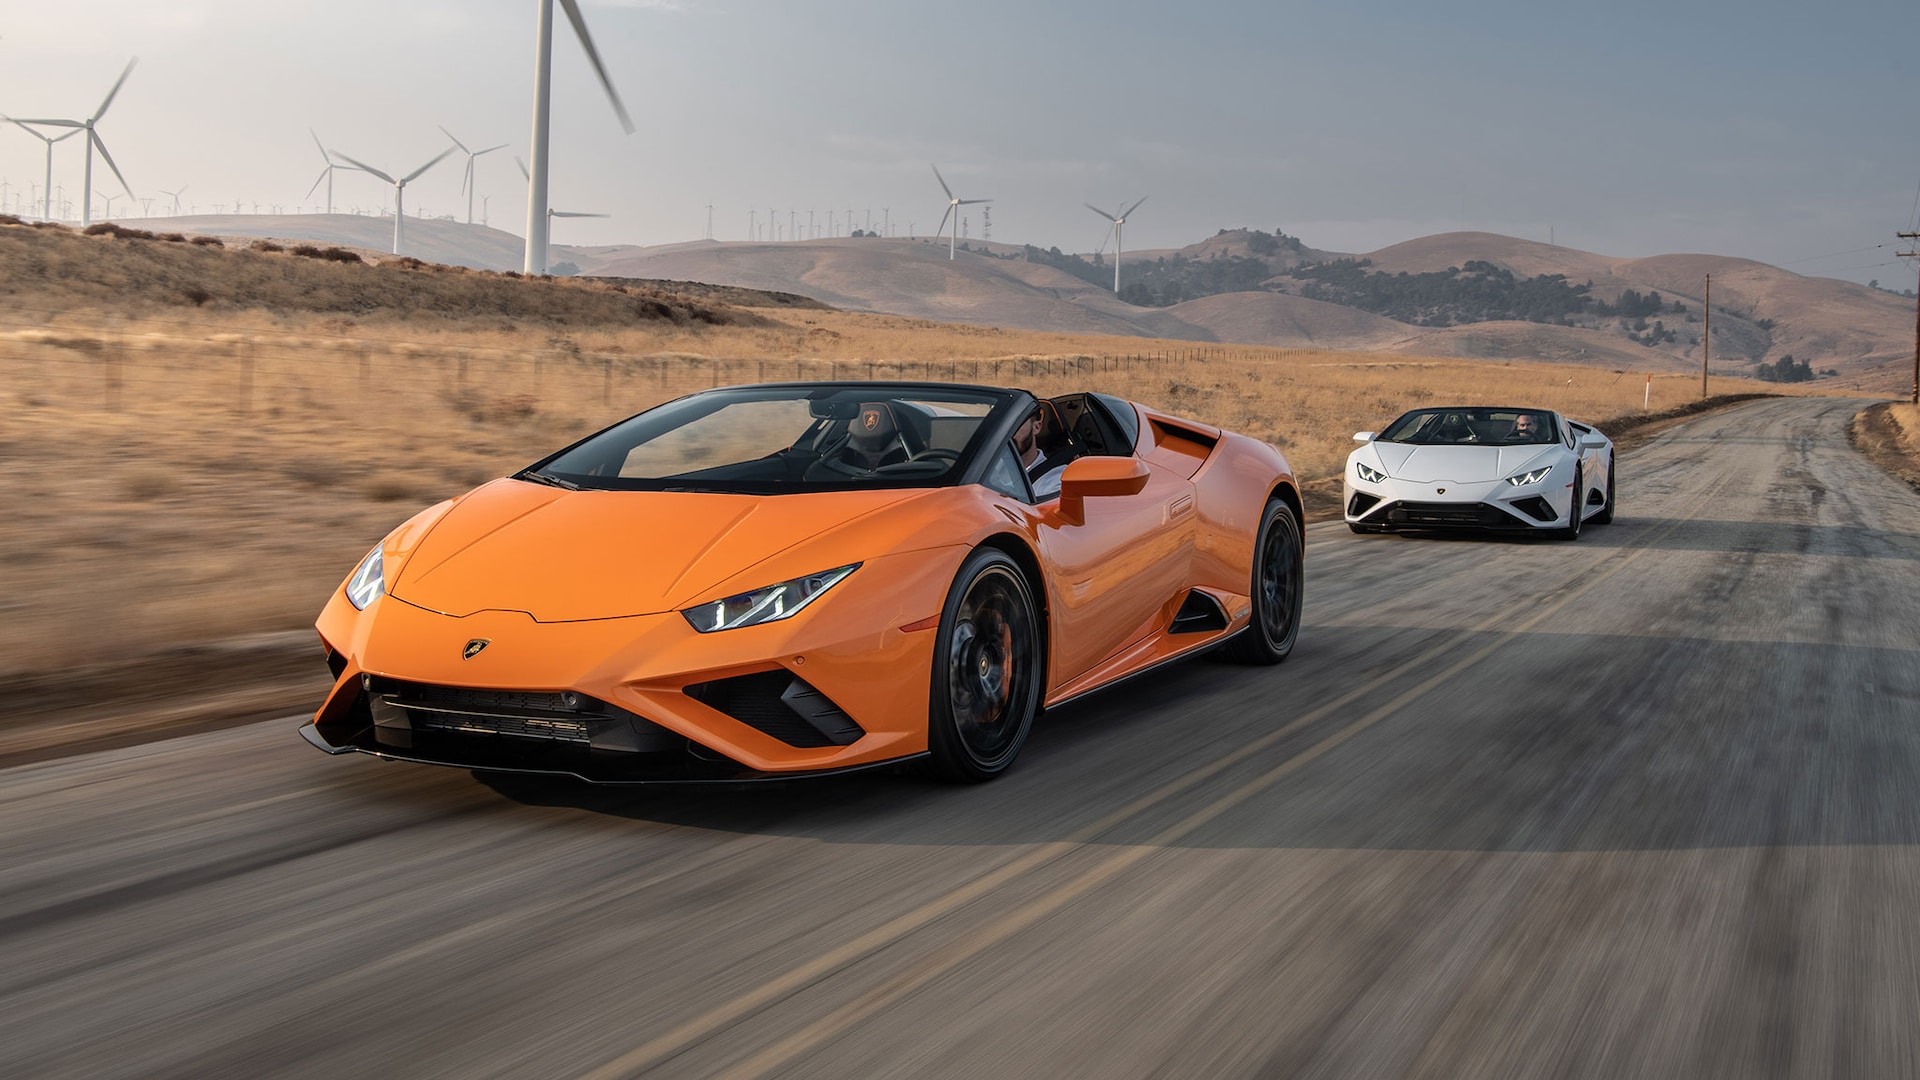 2020 Lamborghini Huracán Evo RWD Coupe and Spyder First Drive: Fun Redefined